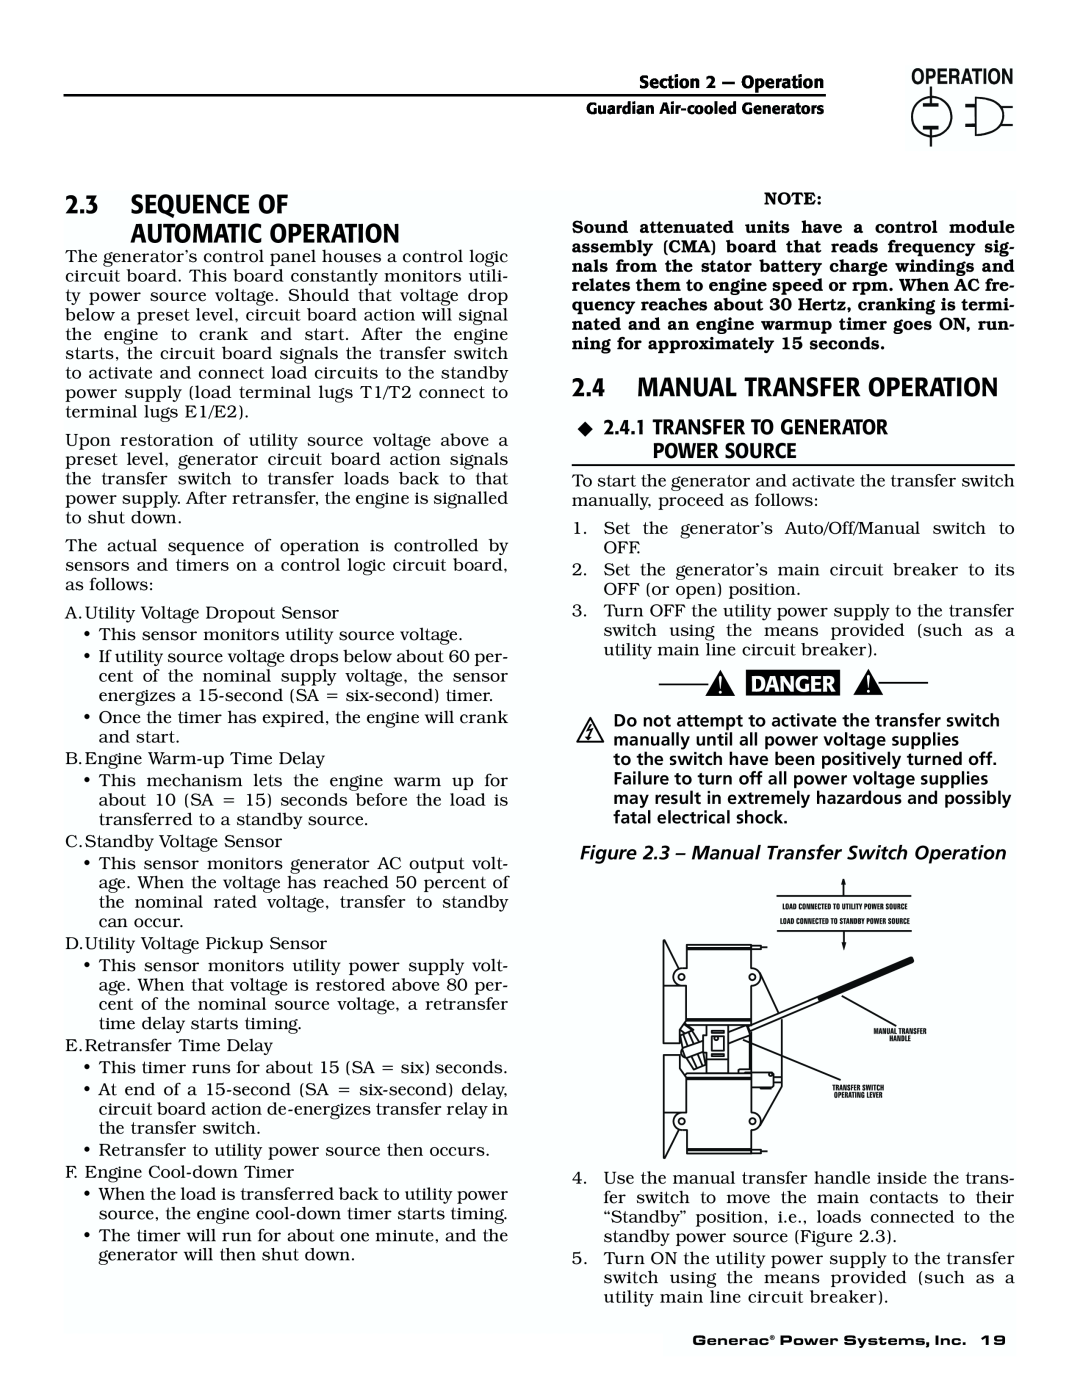 Generac 04077-1, 04109-1, 04079-1, 00789-1, 00844-1 manual 2.3SEQUENCE OF AUTOMATIC OPERATION, 2.4MANUAL TRANSFER OPERATION 